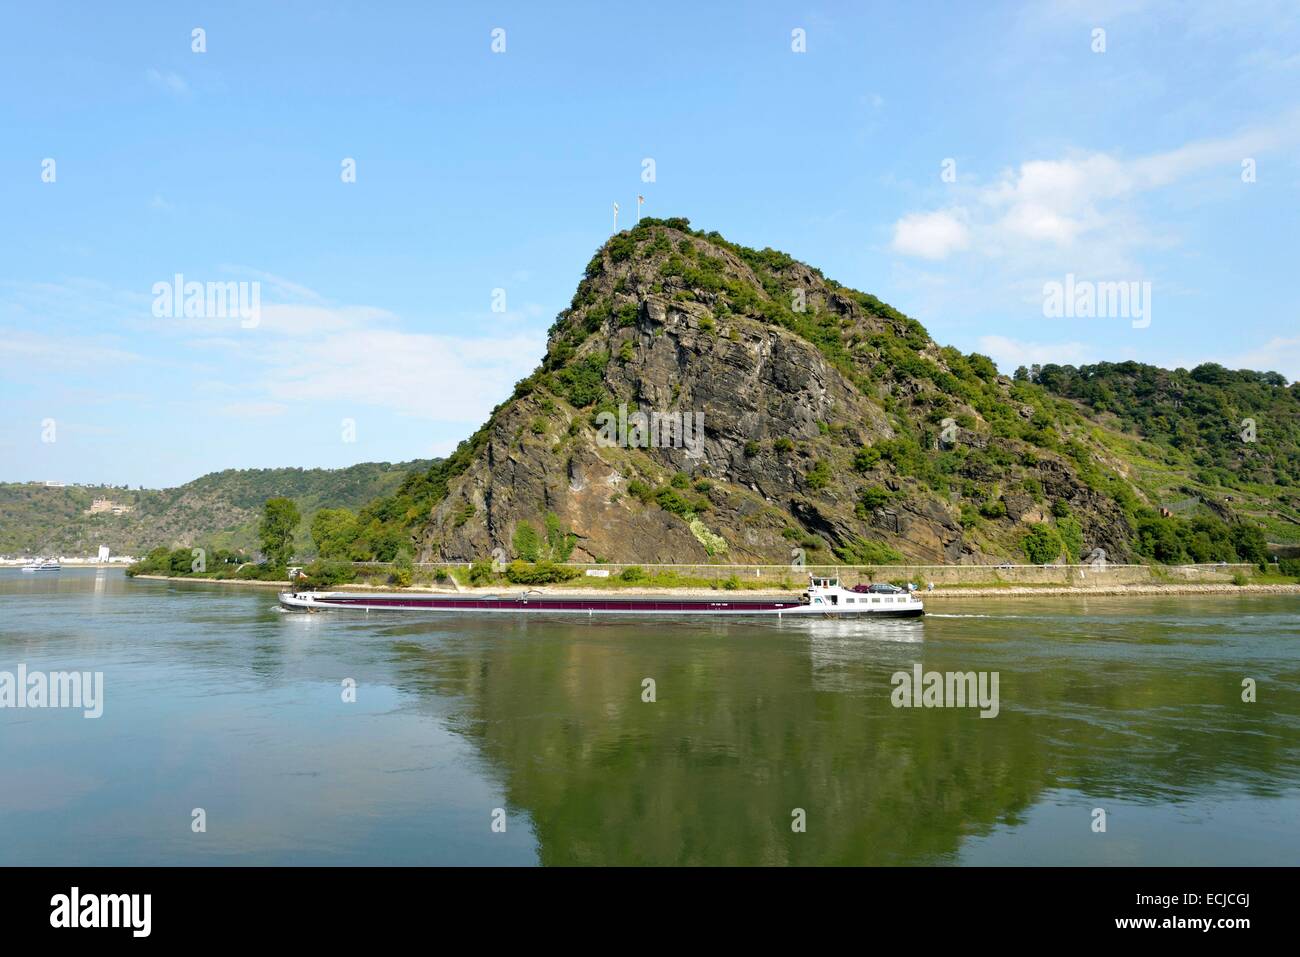 Germany, Rhineland Palatinate, the Loreley (Lorelei) rock near Sankt Goarshausen and the (Burg) castle of Katz, the romantic Rhine listed as World Heritage by UNESCO Stock Photo